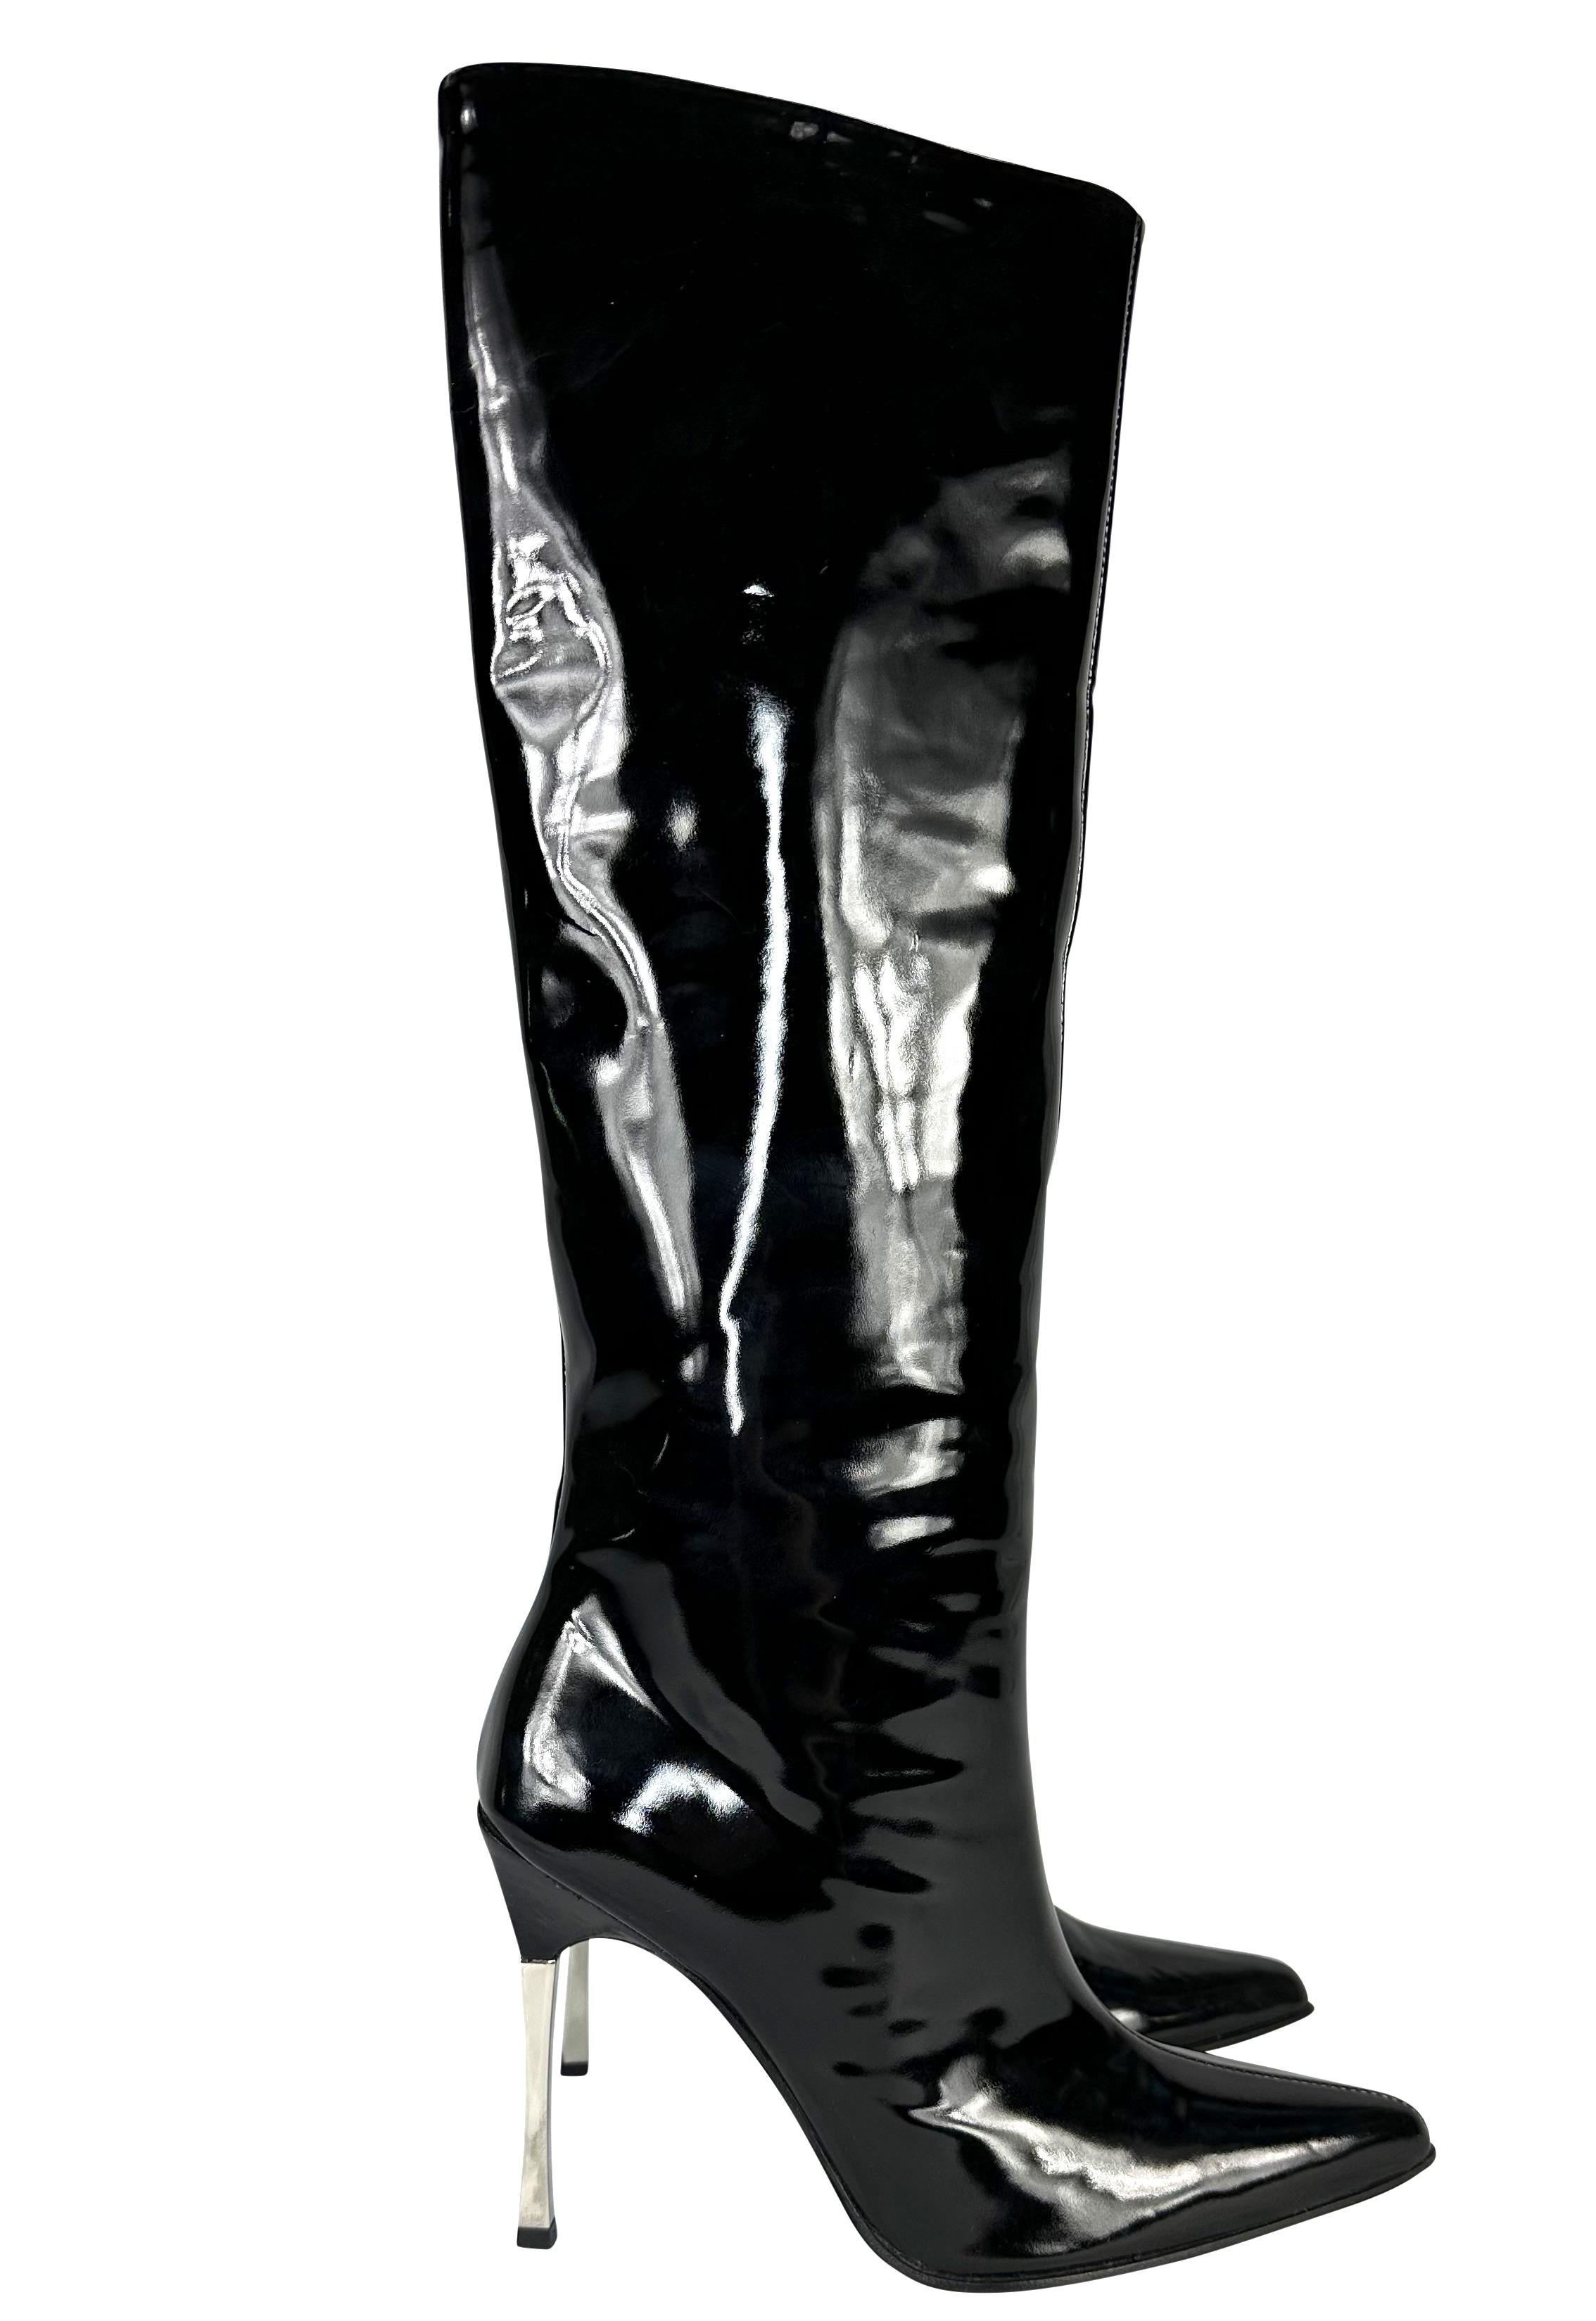 NEW F/W 1997 Gucci by Tom Ford Ad Runway Black Patent Leather Heel Boots 37 C For Sale 4